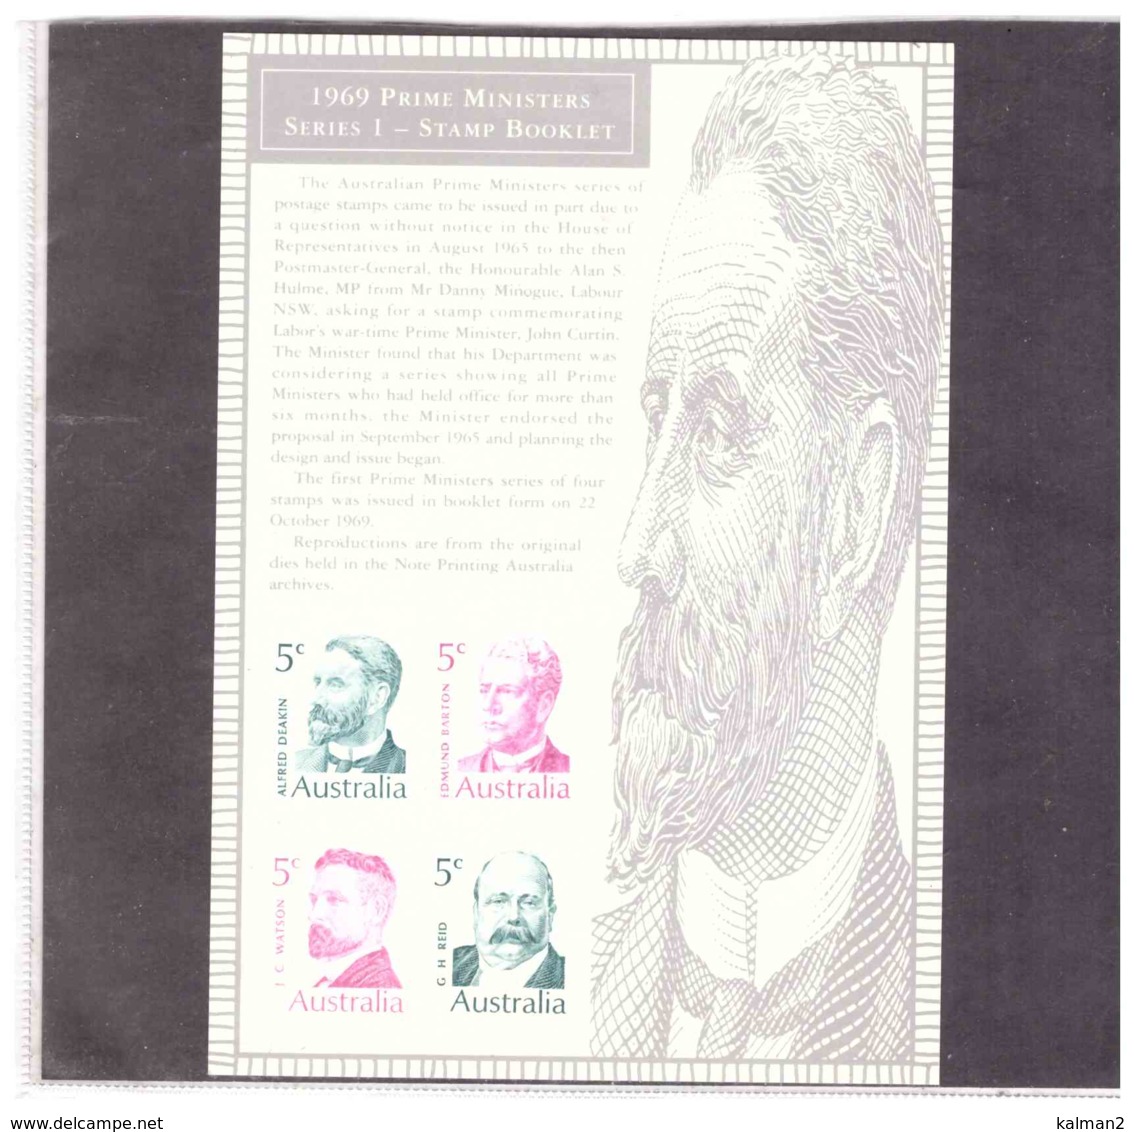 STAMP REPLICA CARD NO. 32   - 11.8.1994     /   1969  PRIME MINISTERS - Proofs & Reprints